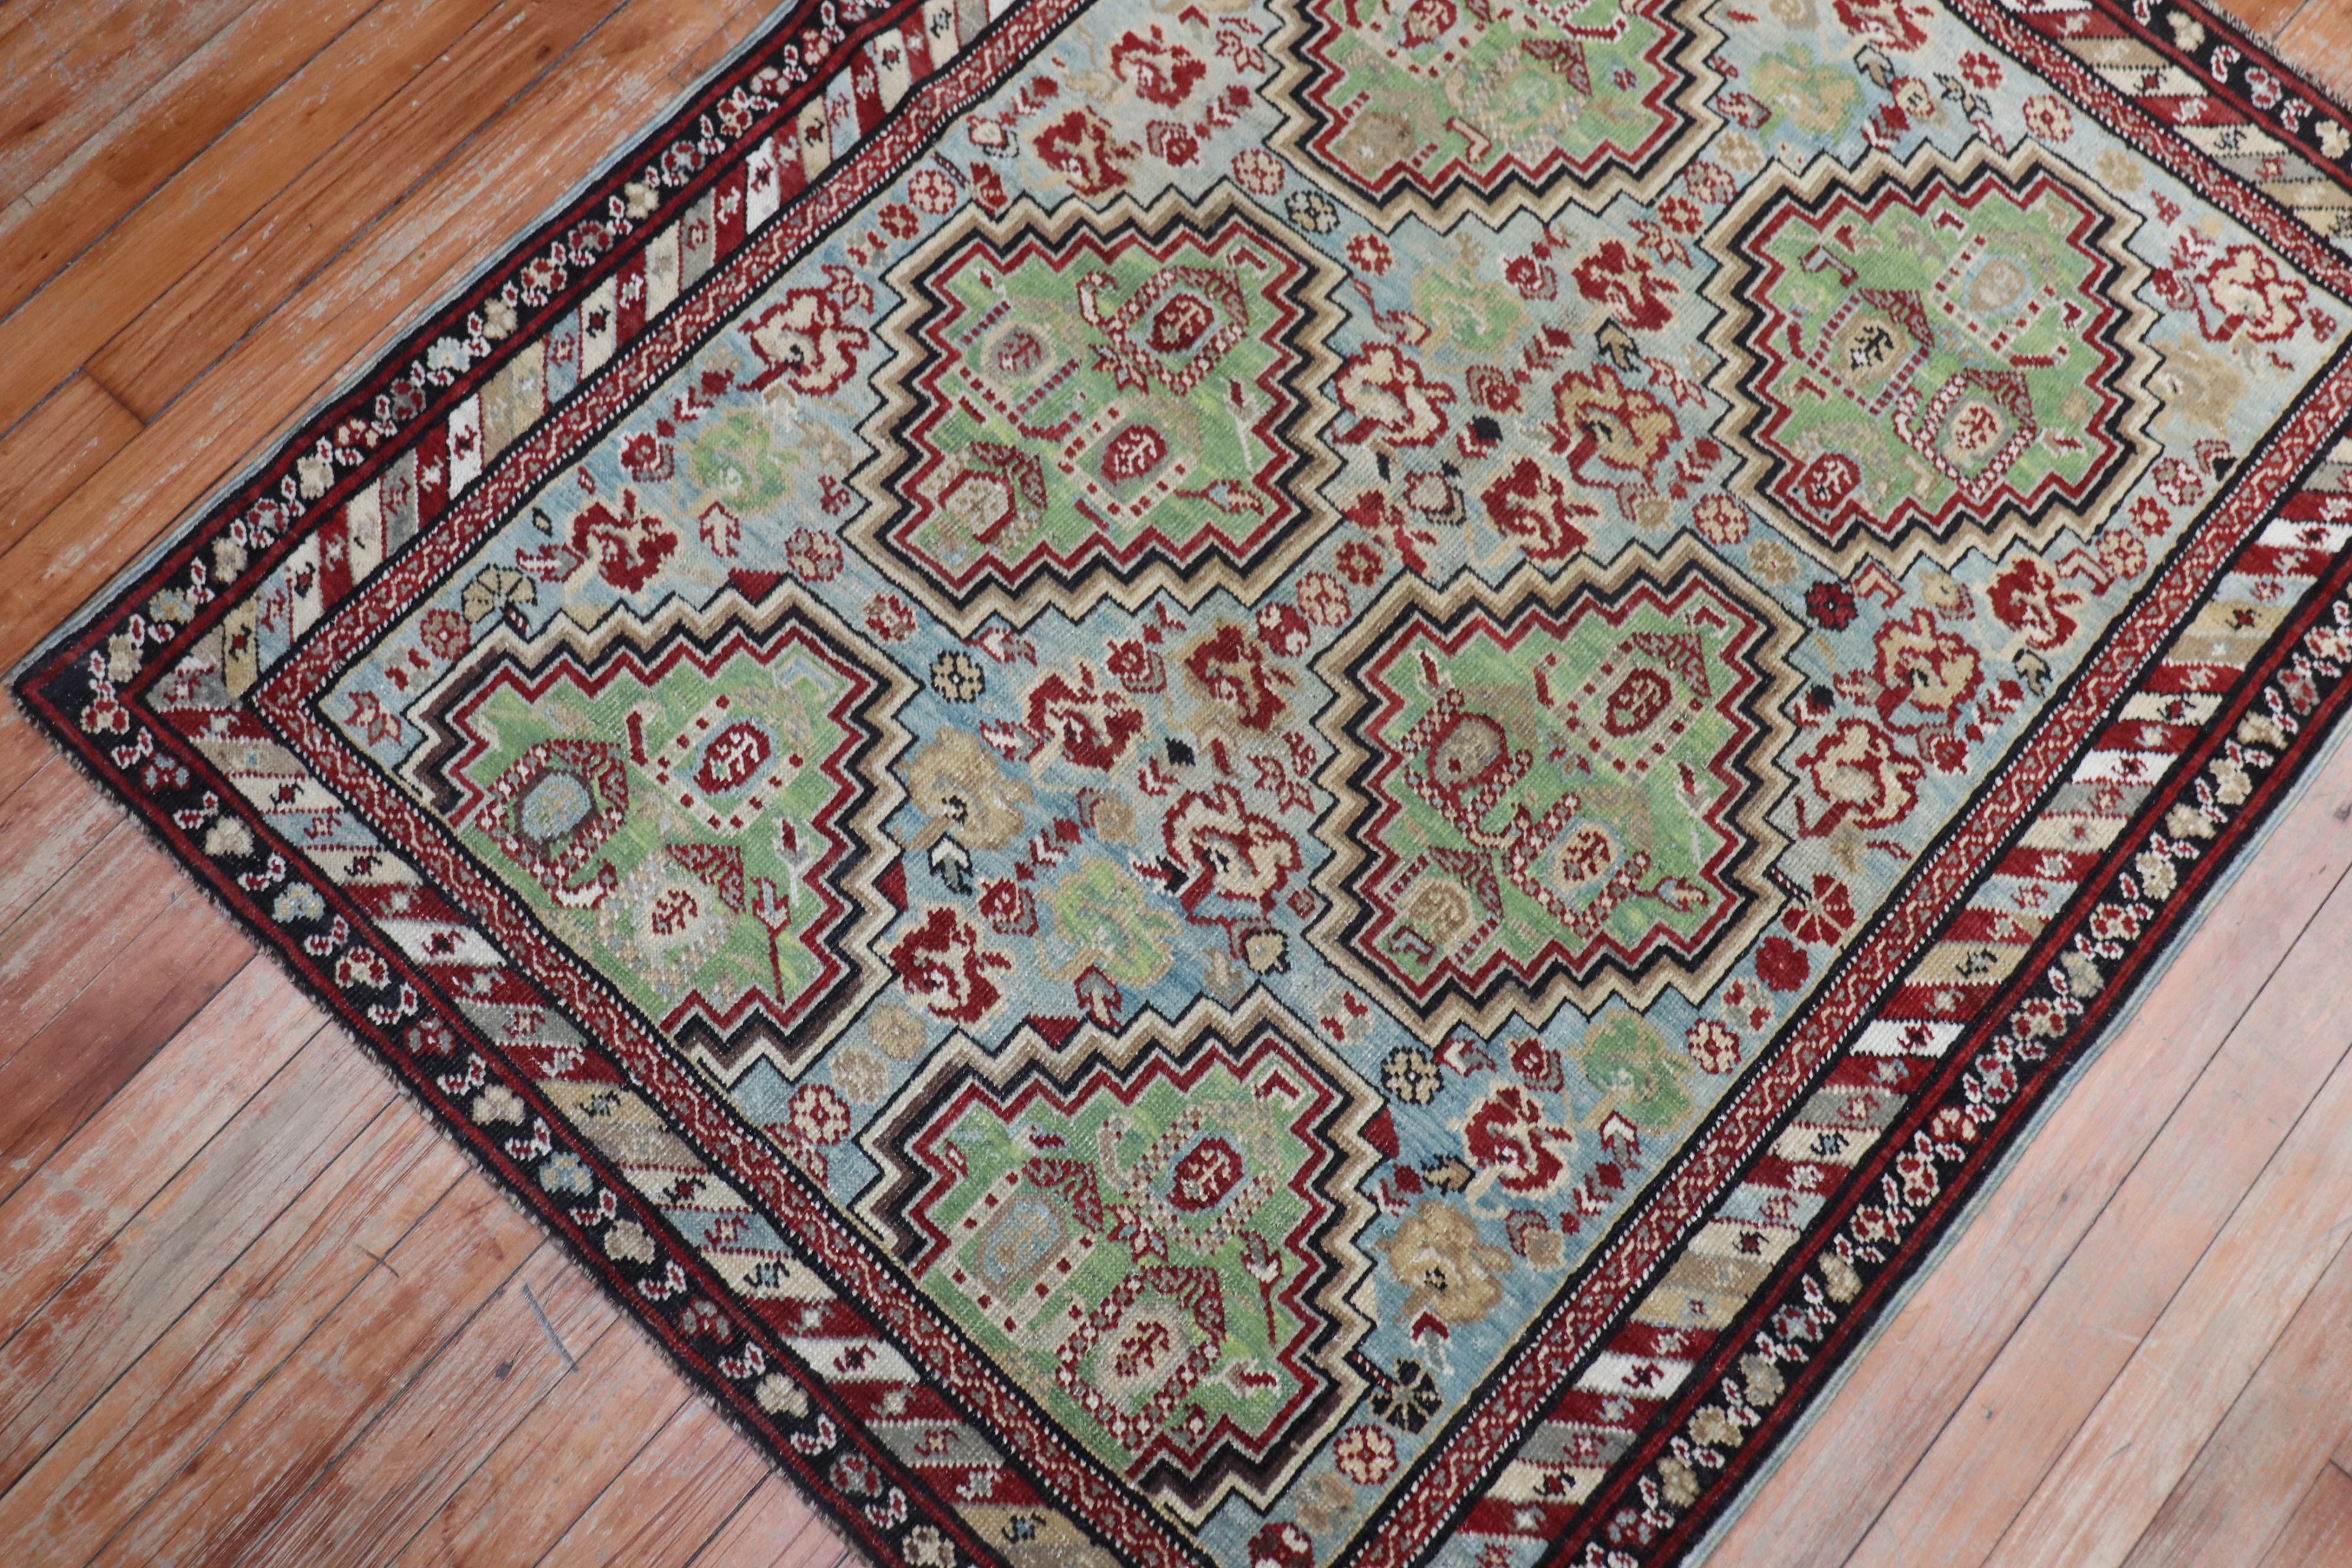 A late 19th century antique Caucasian Baku Khila rug with 6-light green medallions (2 of the medallions are half full) on a light blue field surrounded by a multi-band border

Measures: 3'4